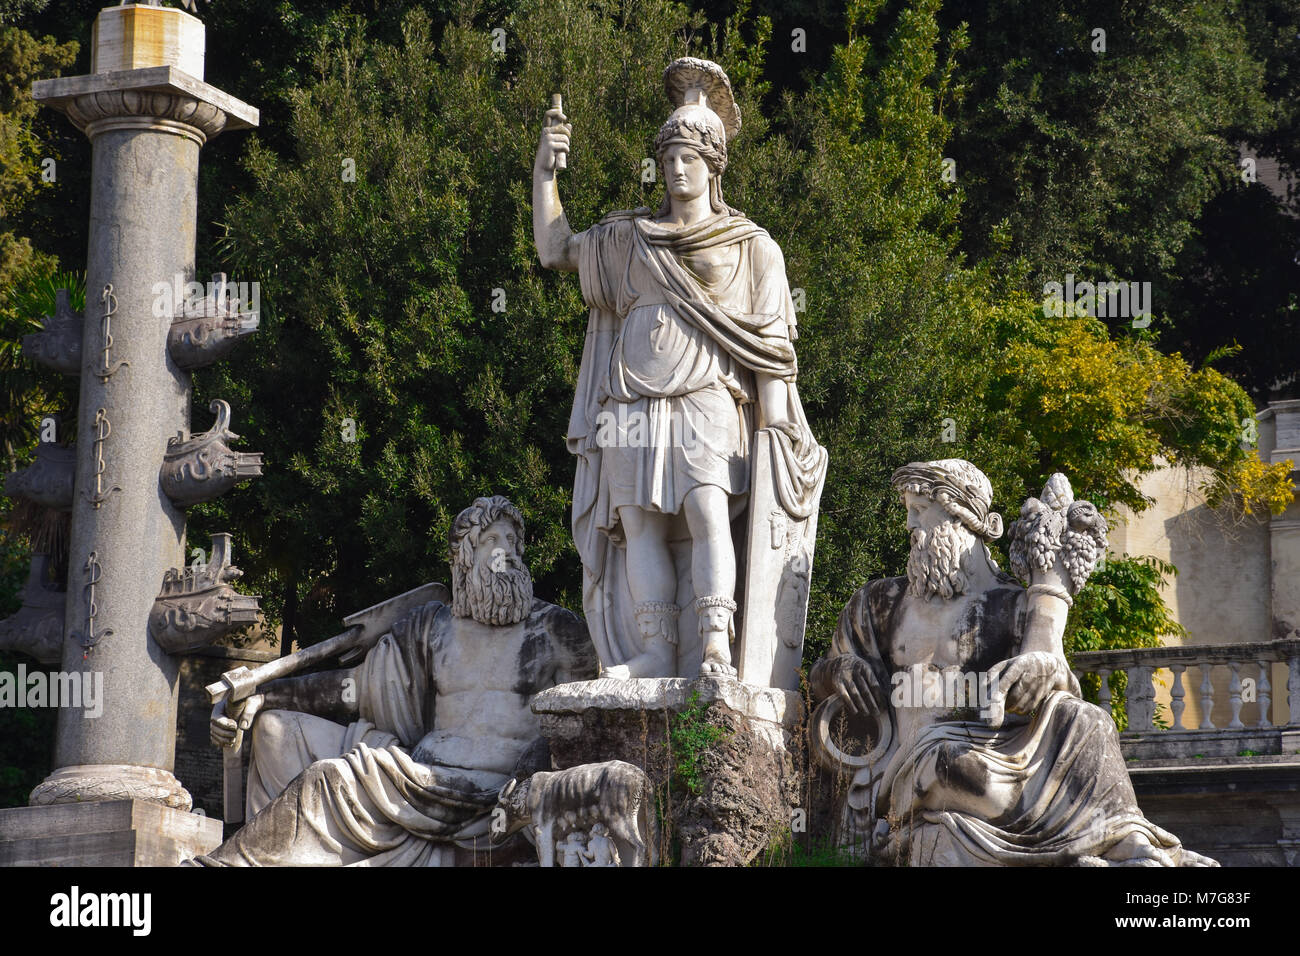 Sculpture at the Piazza del Popolo (People's Square). Rome, Italy Stock Photo